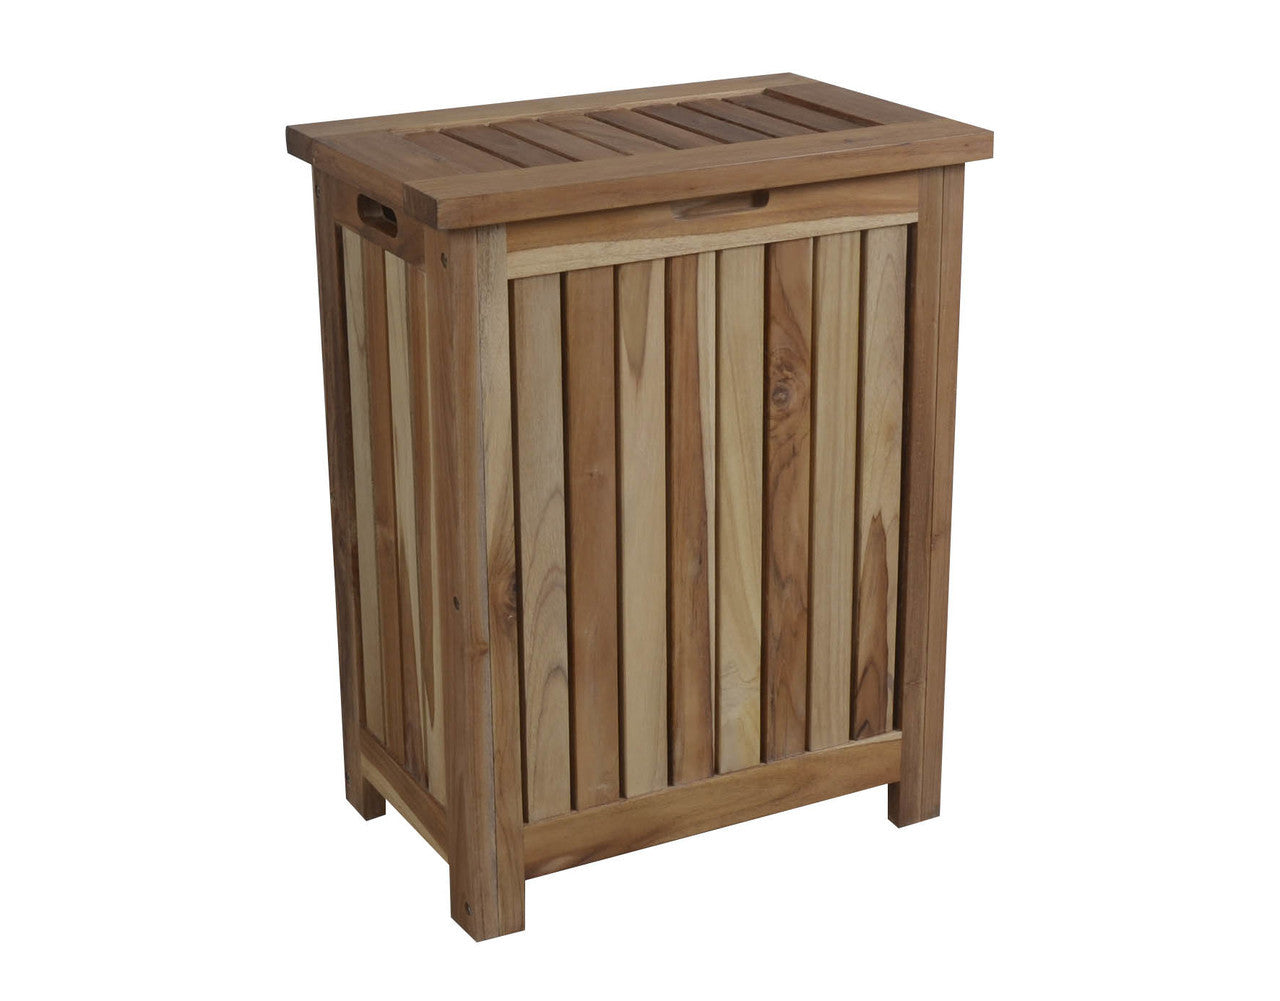 EcoDecors® Eleganto® 20" Teak Wood Double Laundry Storage Hamper with Removable Bags in EarthyTeak Finish